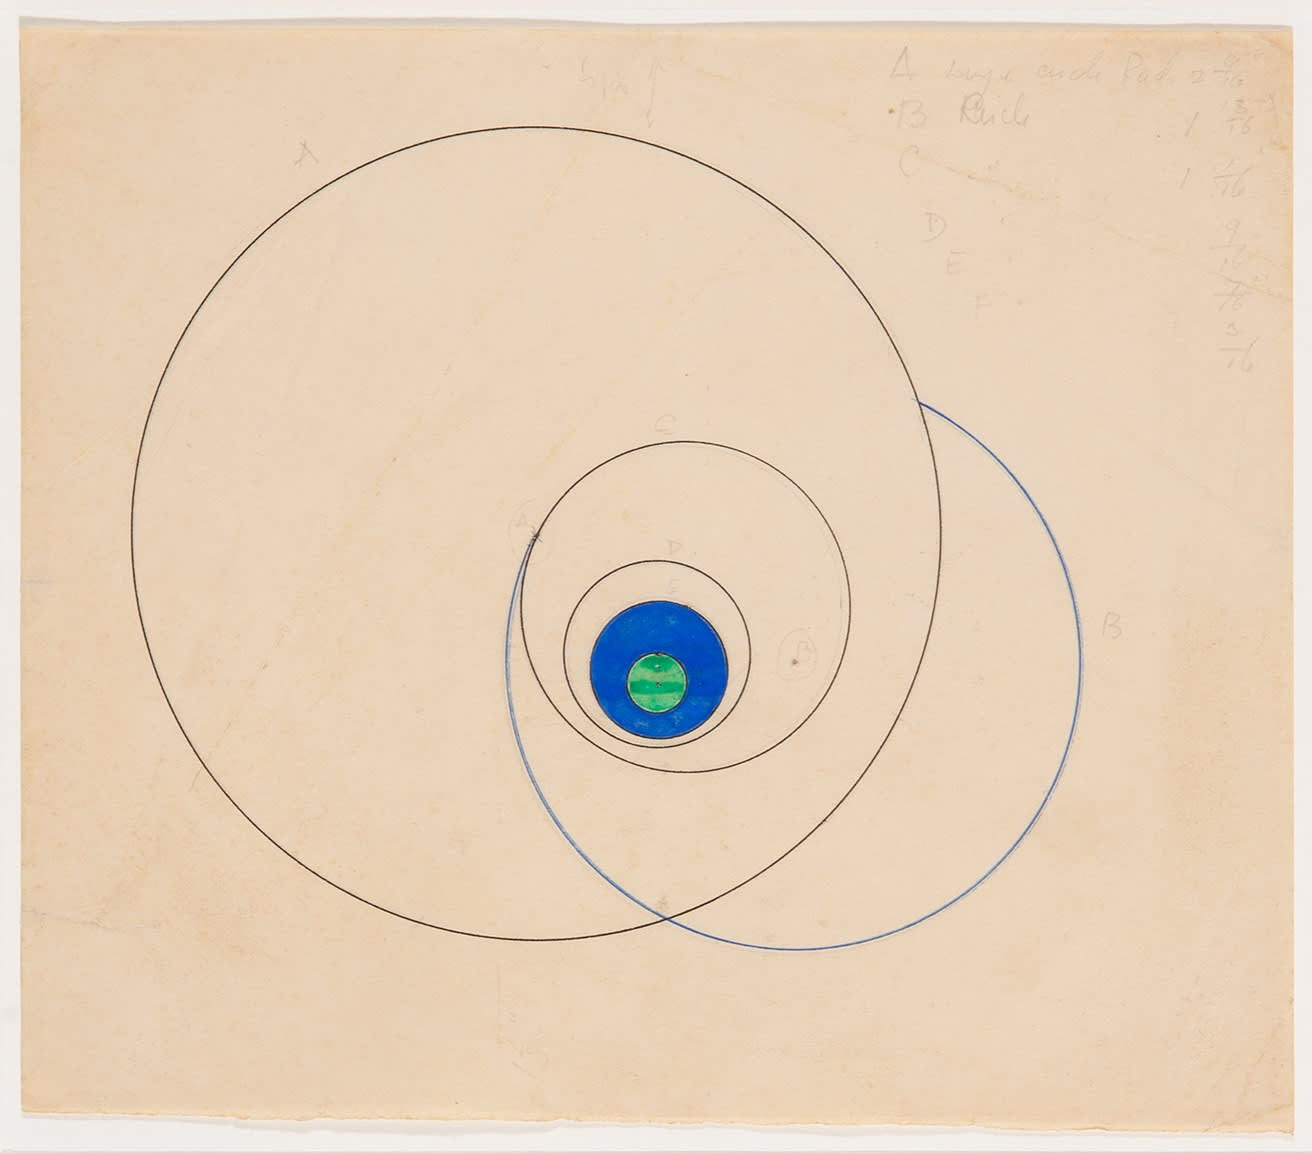 MARLOW MOSS, Untitled (Green and blue circle), c. early1940s